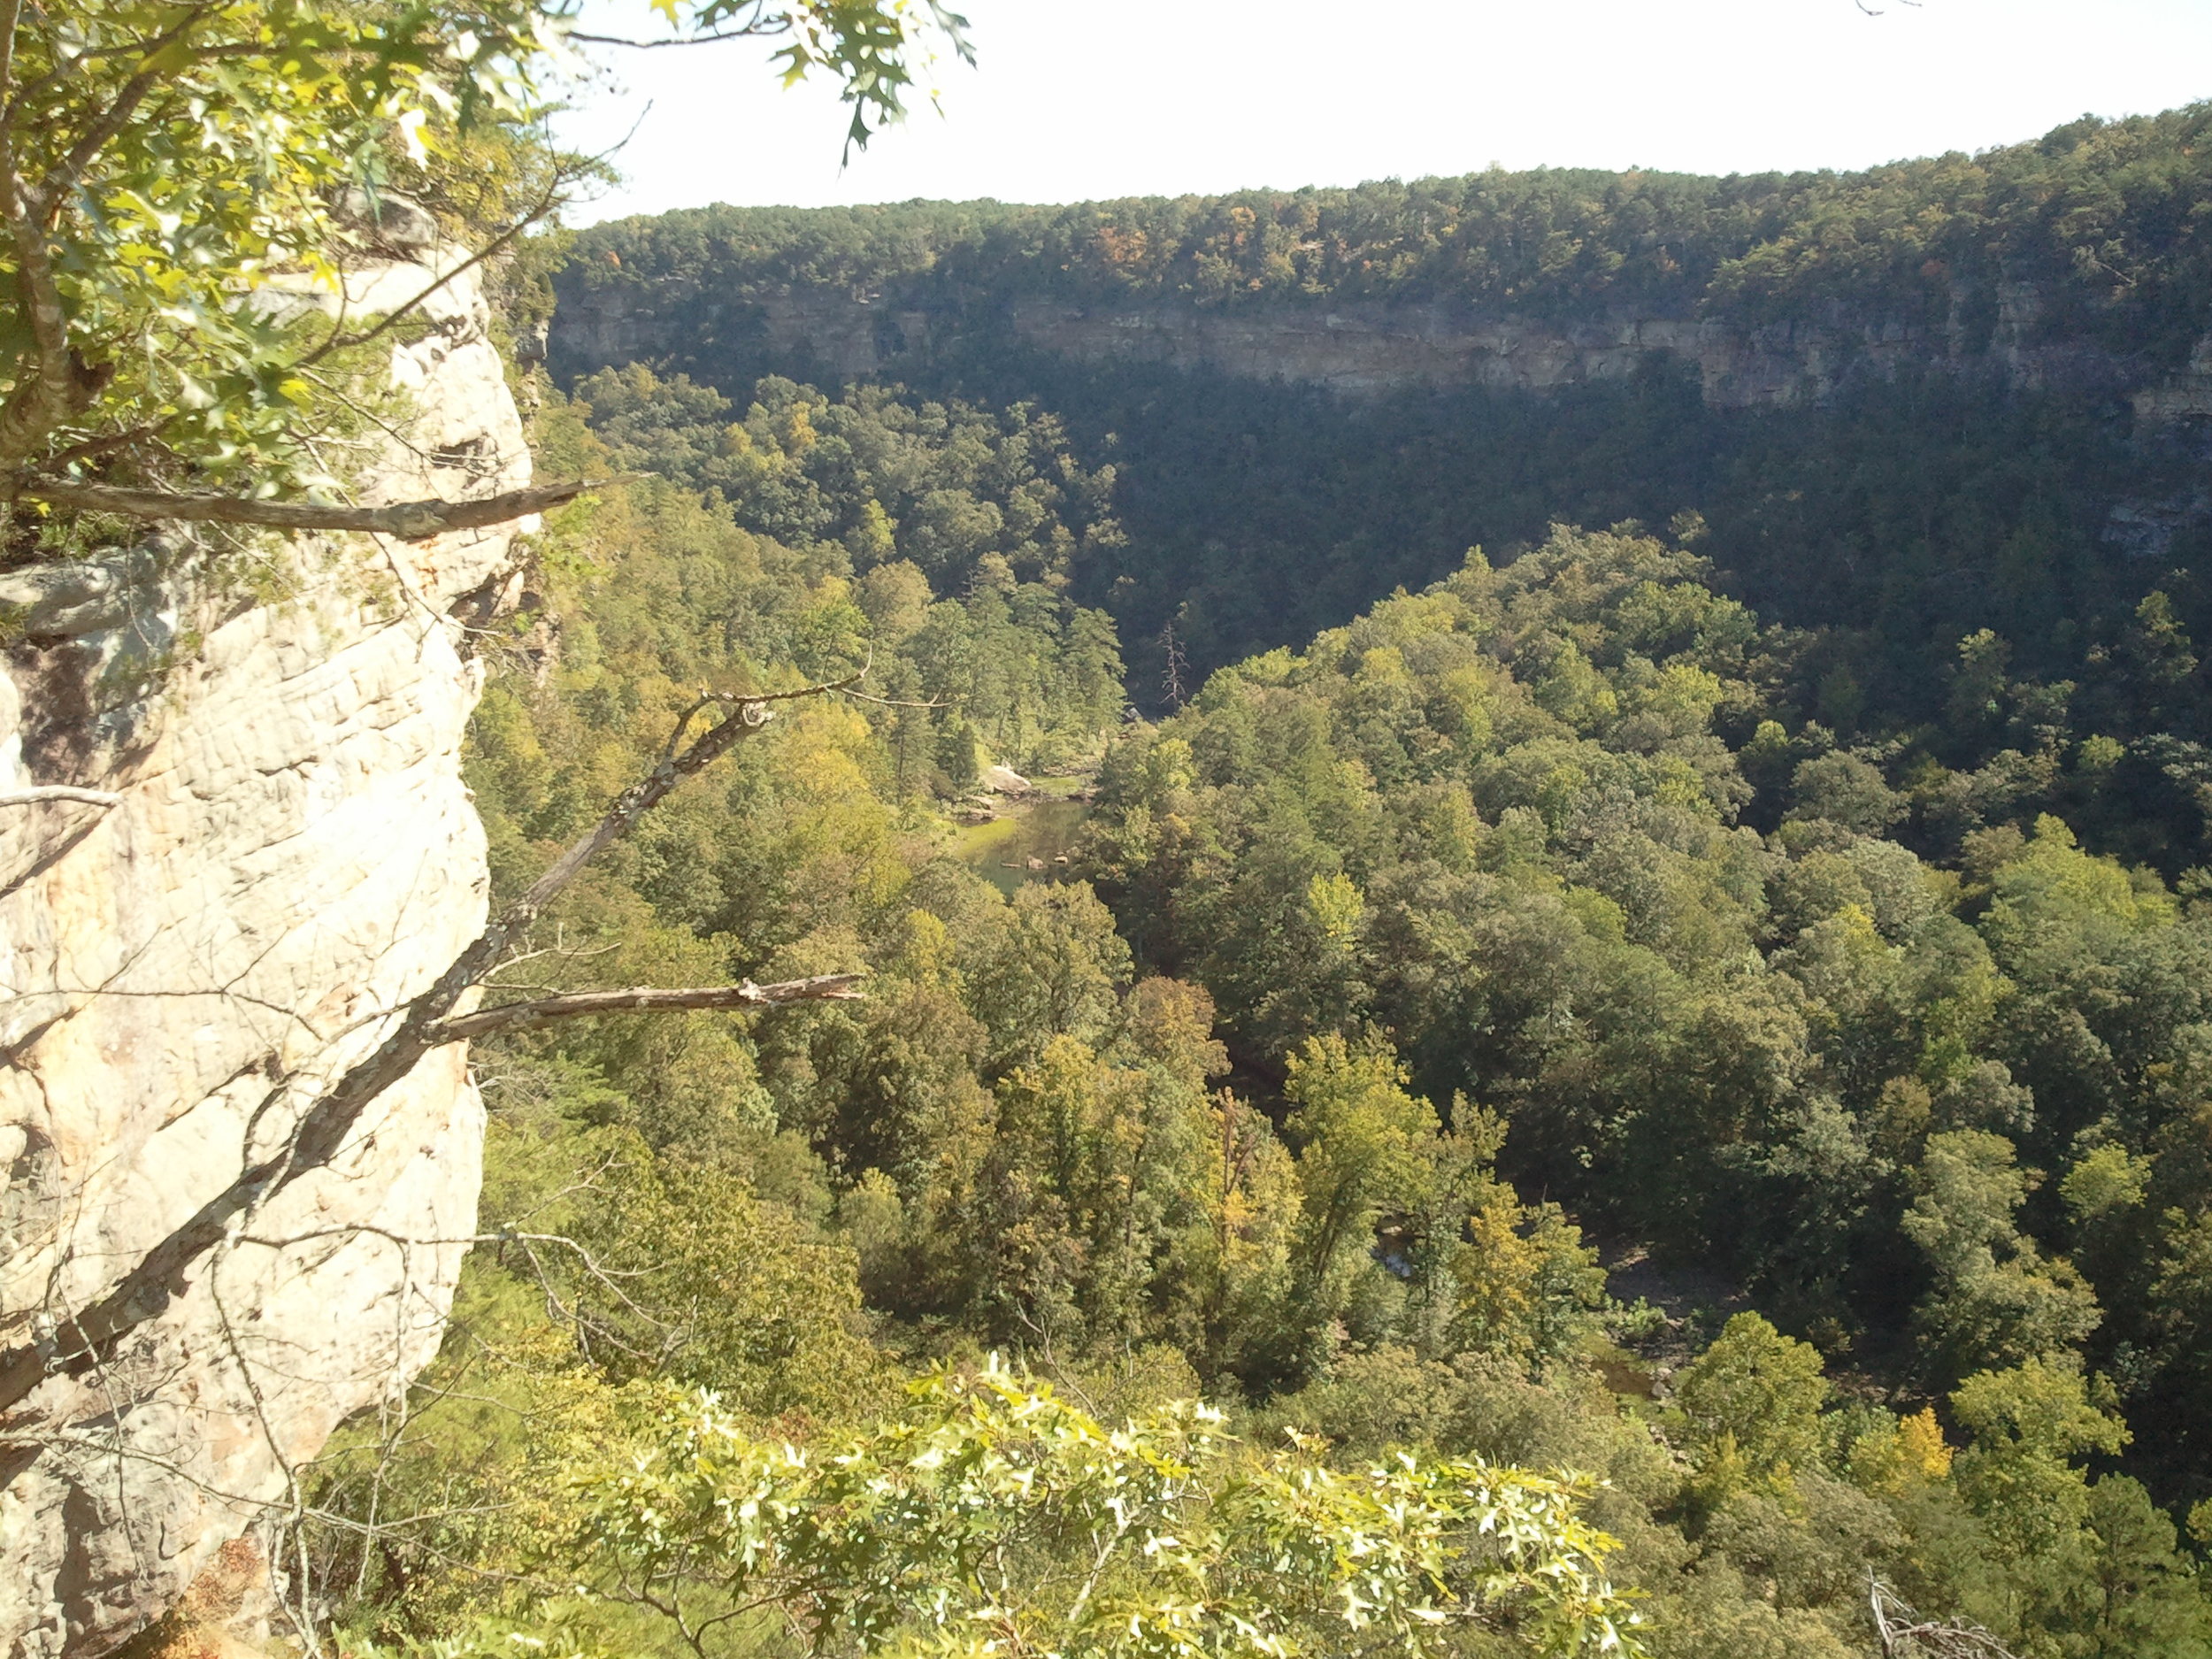 Pictures from yesterday's trek to Little River Canyon